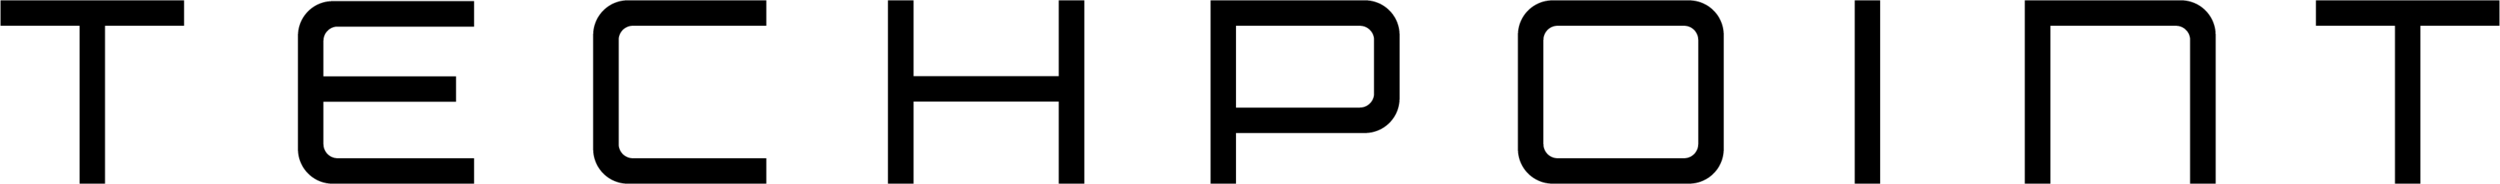 techpoint-logo-black.png